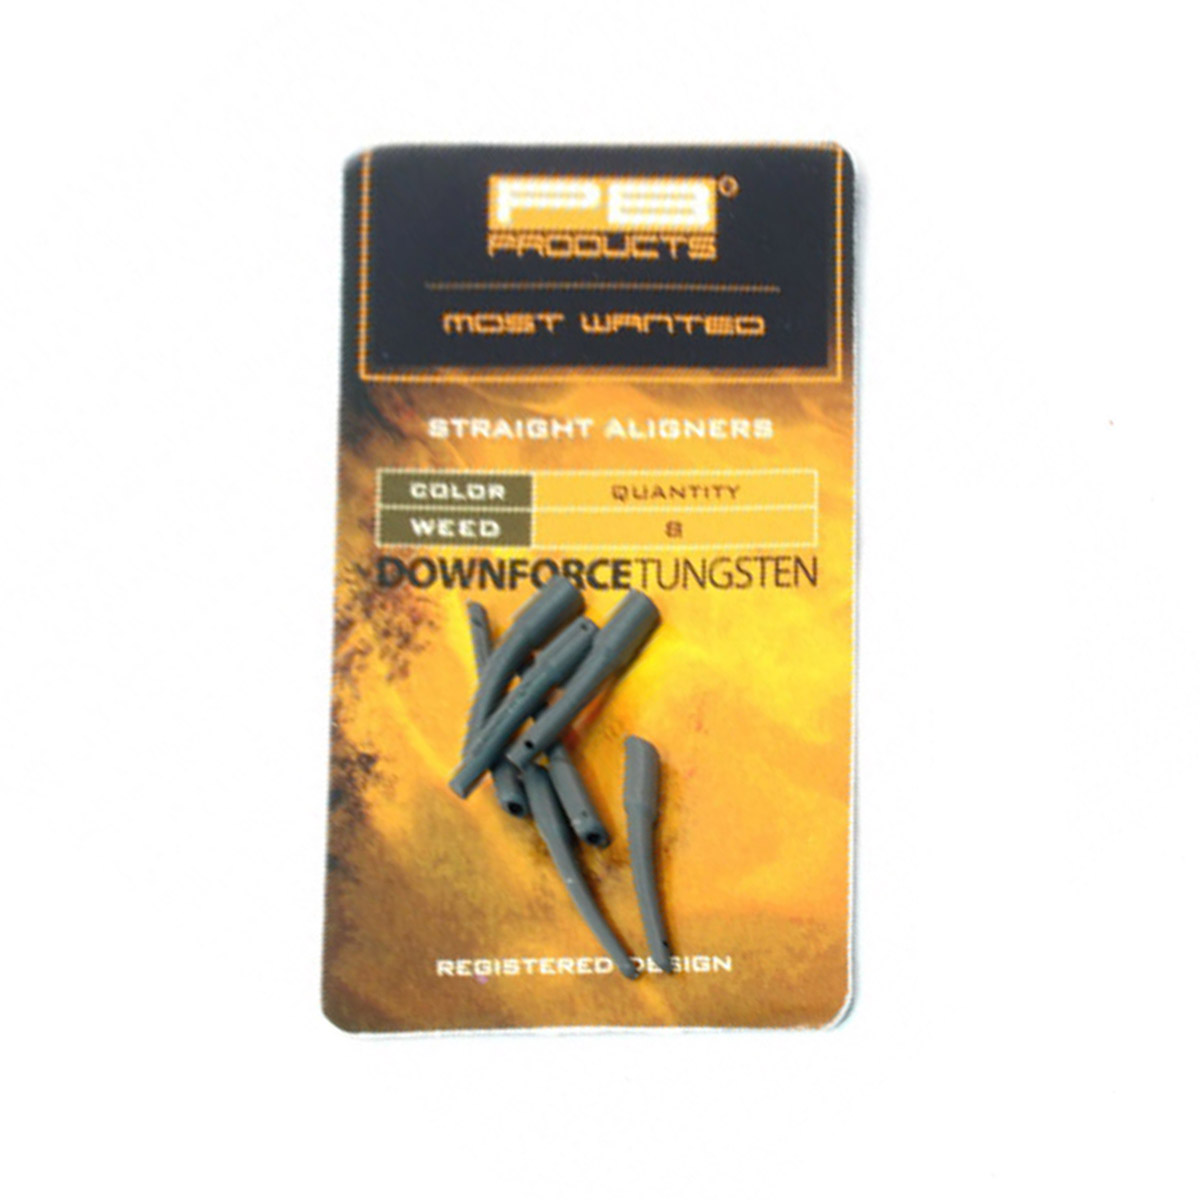 PB Products Downforce Tungsten Straight Aligners